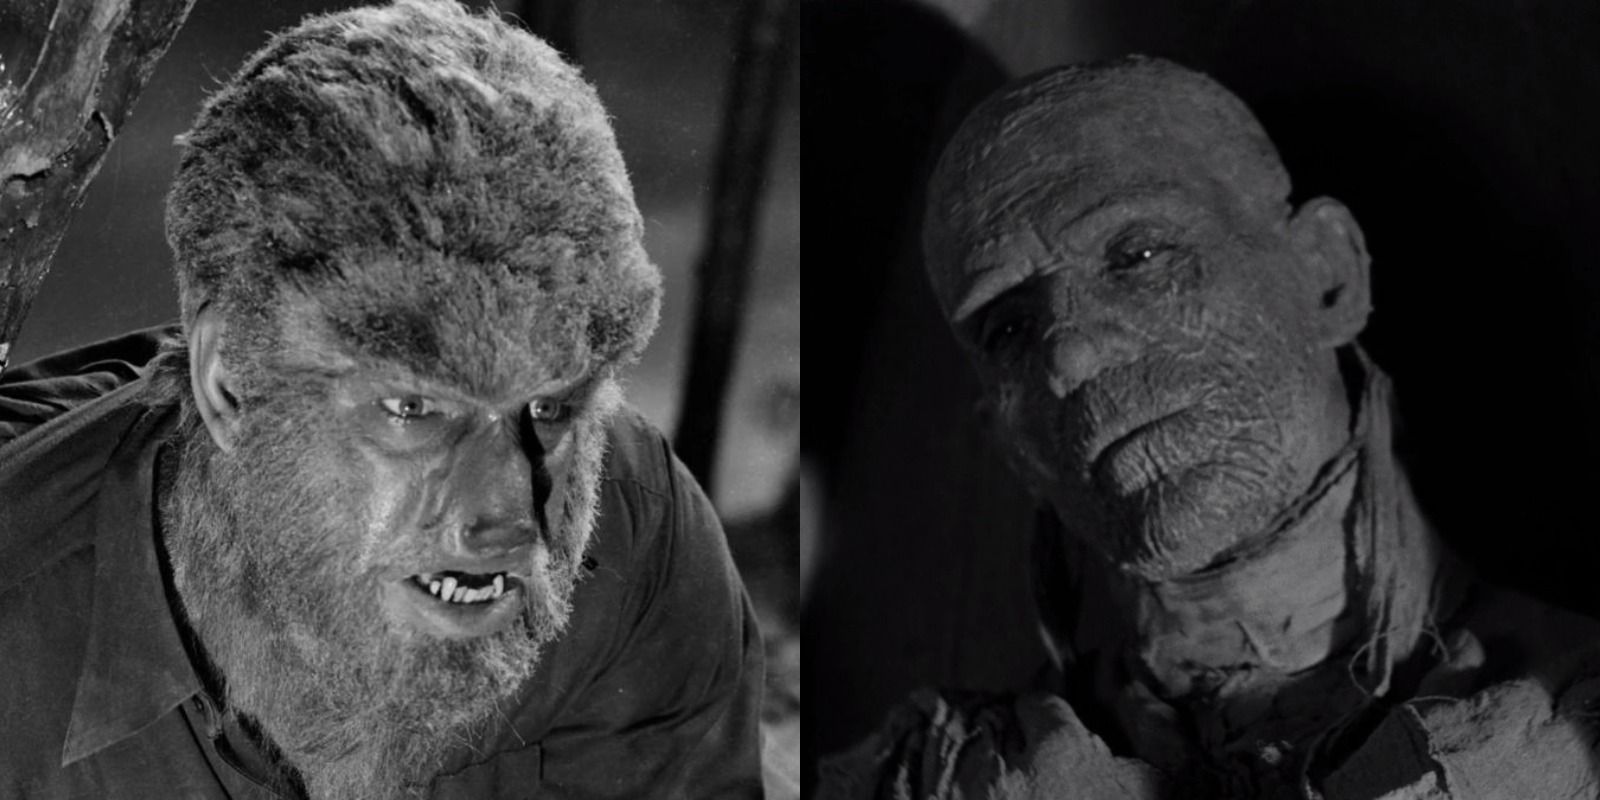 Split image of The Wolf Man skulking through the woods in The Wolf Man and Imhotep awakening in his sarcophagus in The Mummy